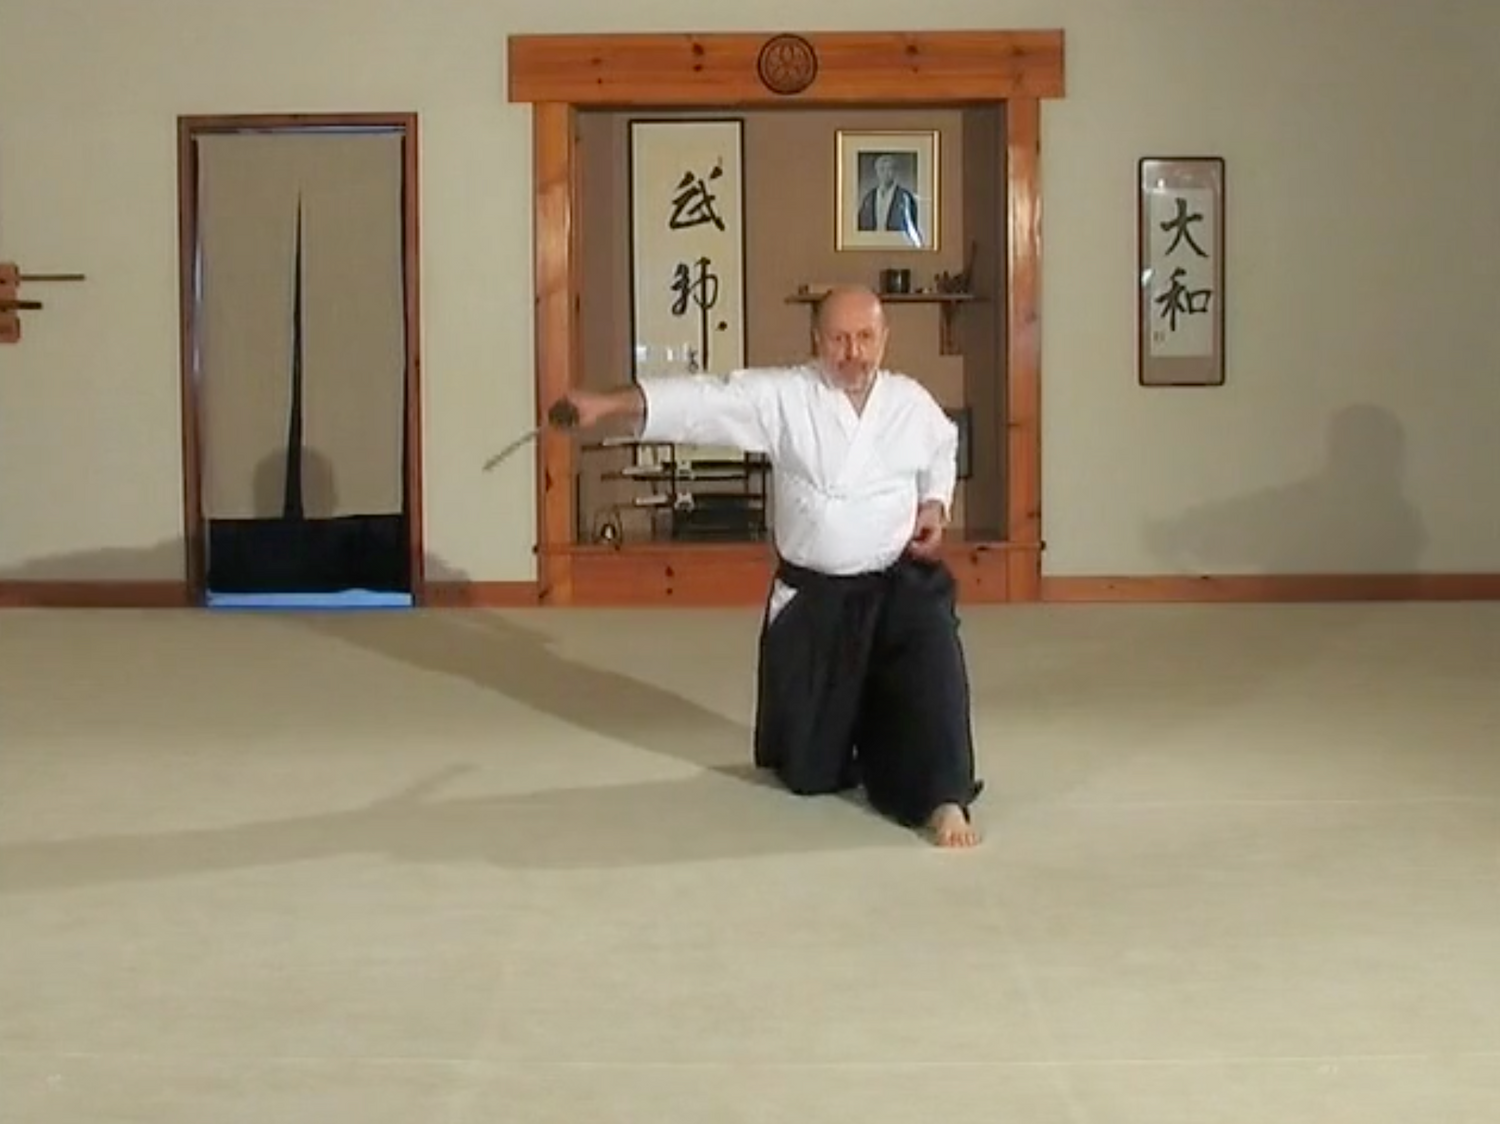 Complete Introduction to Muso Shinden Ryu Iaido with Didier Boyet (On Demand)